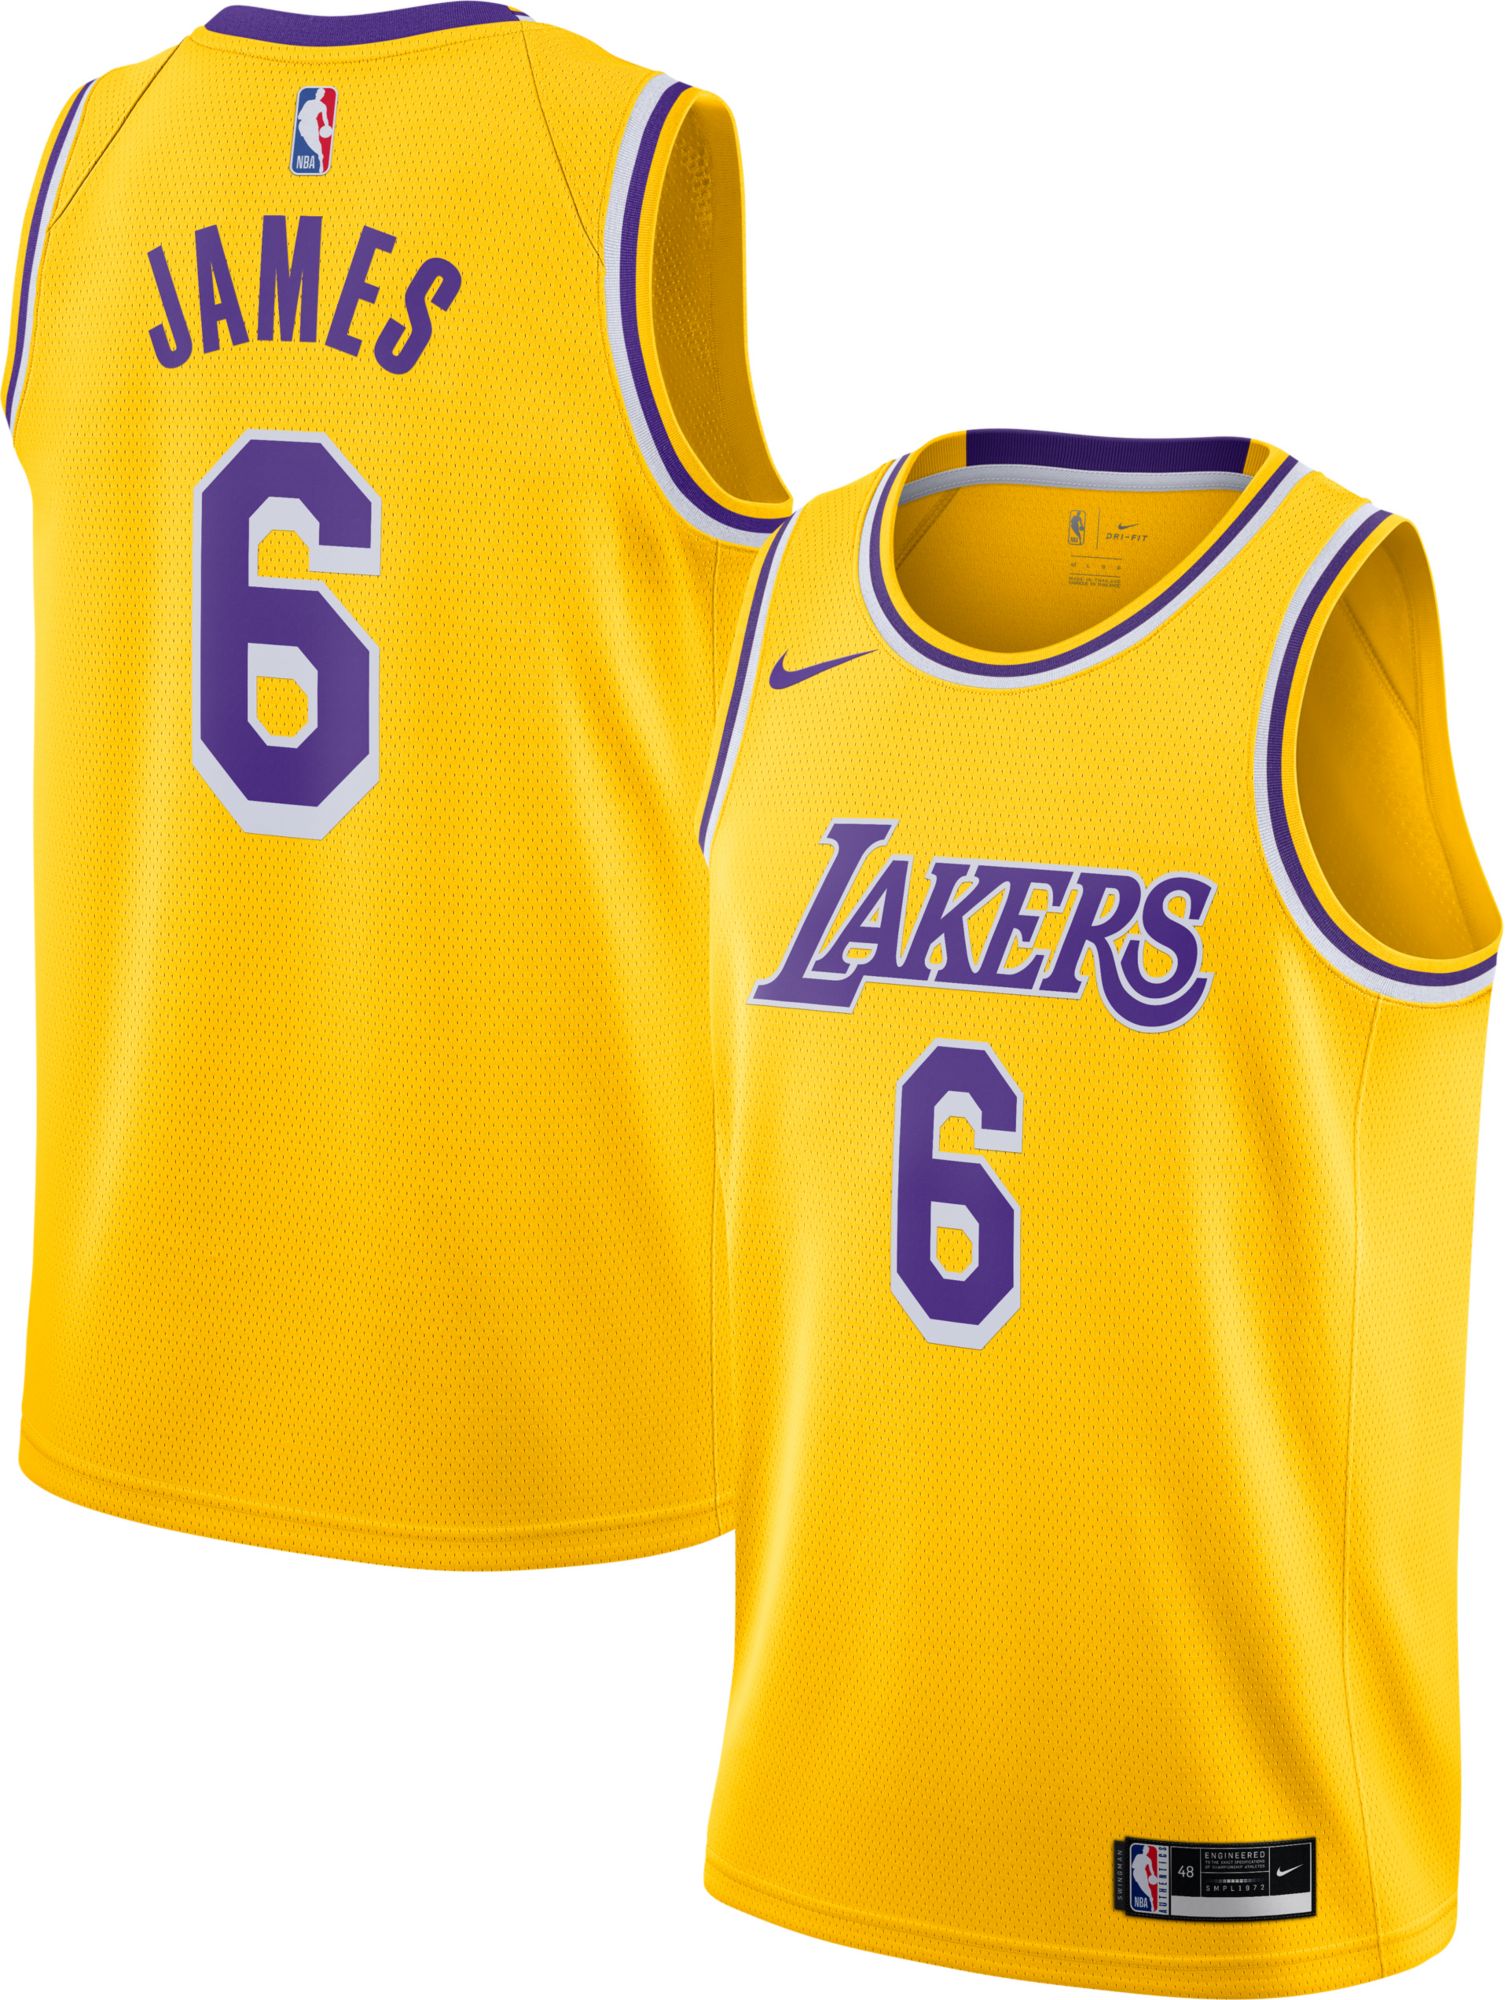 how-much-does-a-lebron-james-jersey-cost-save-up-to-18-www-ilcascinone